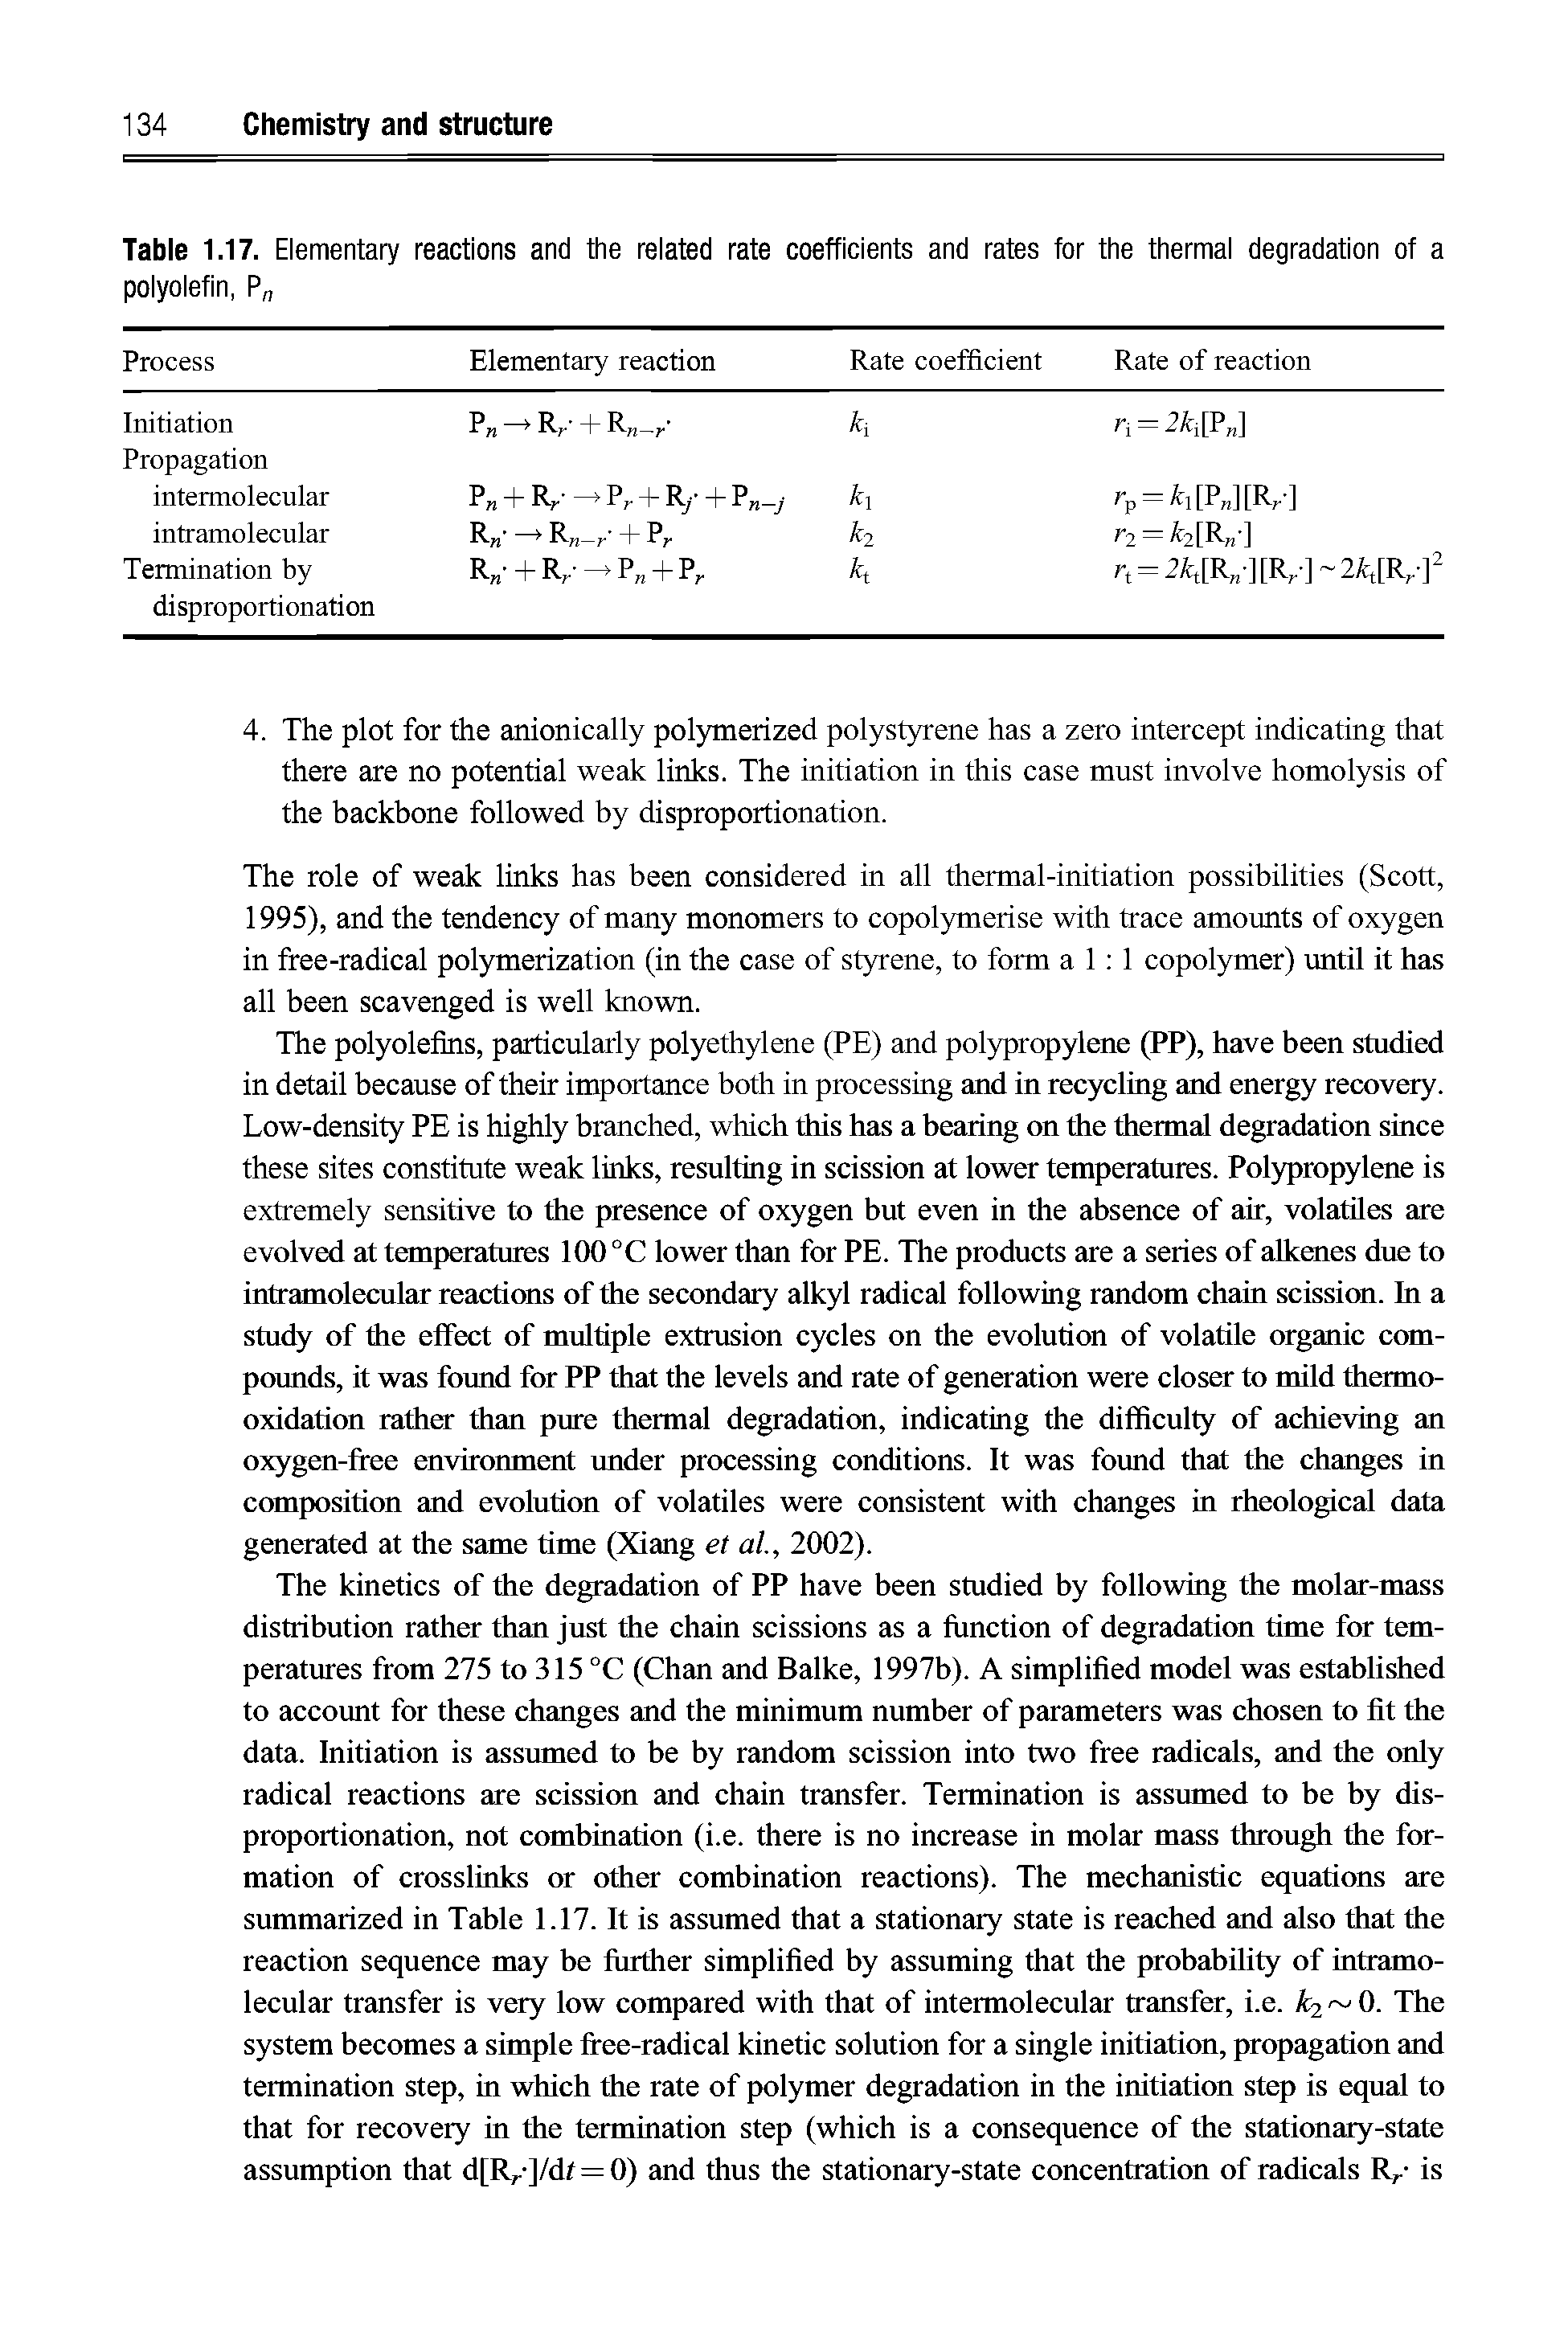 Table 1.17. Elementary reactions and the related rate polyolefin, P coefficients and rates for the thermal degradation of a ...